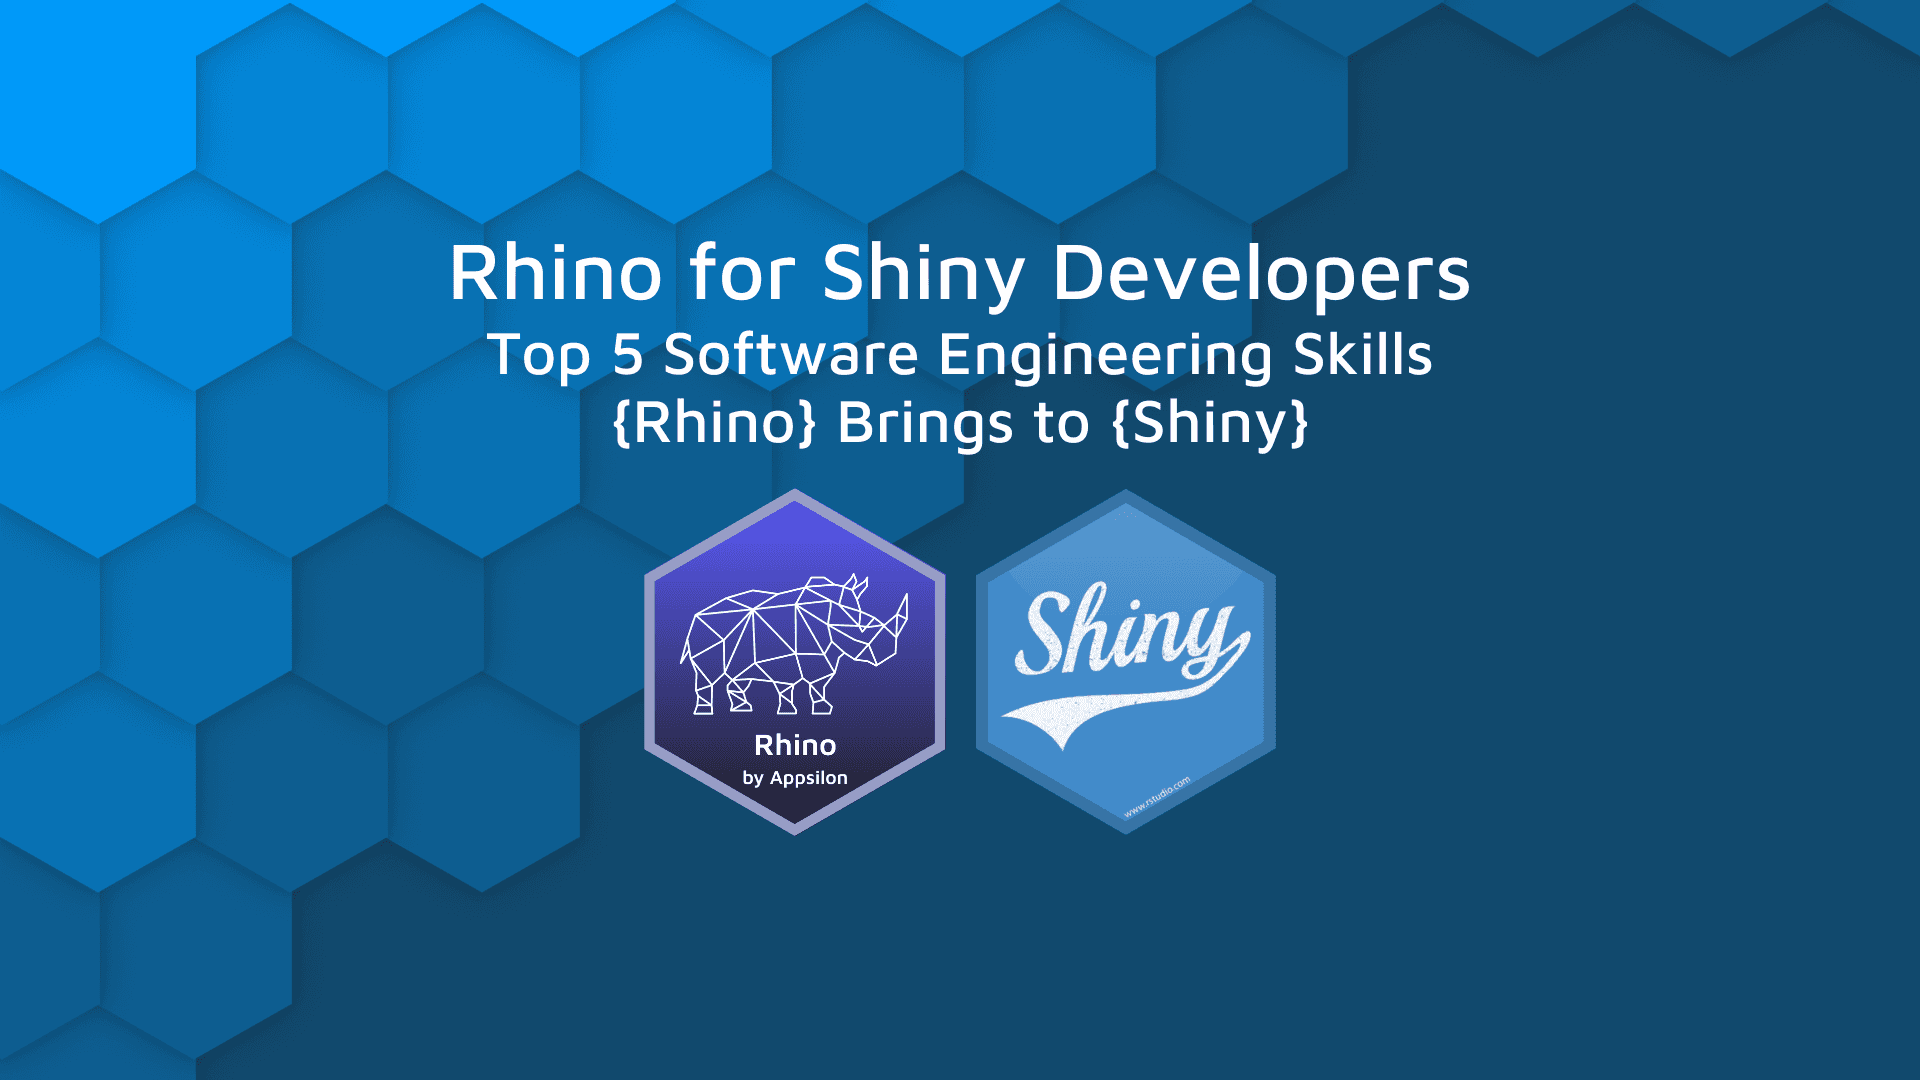 Rhino R package for Shiny Developers in Enterprise - Top 5 Software Engineering Skills Rhino Brings to Shiny